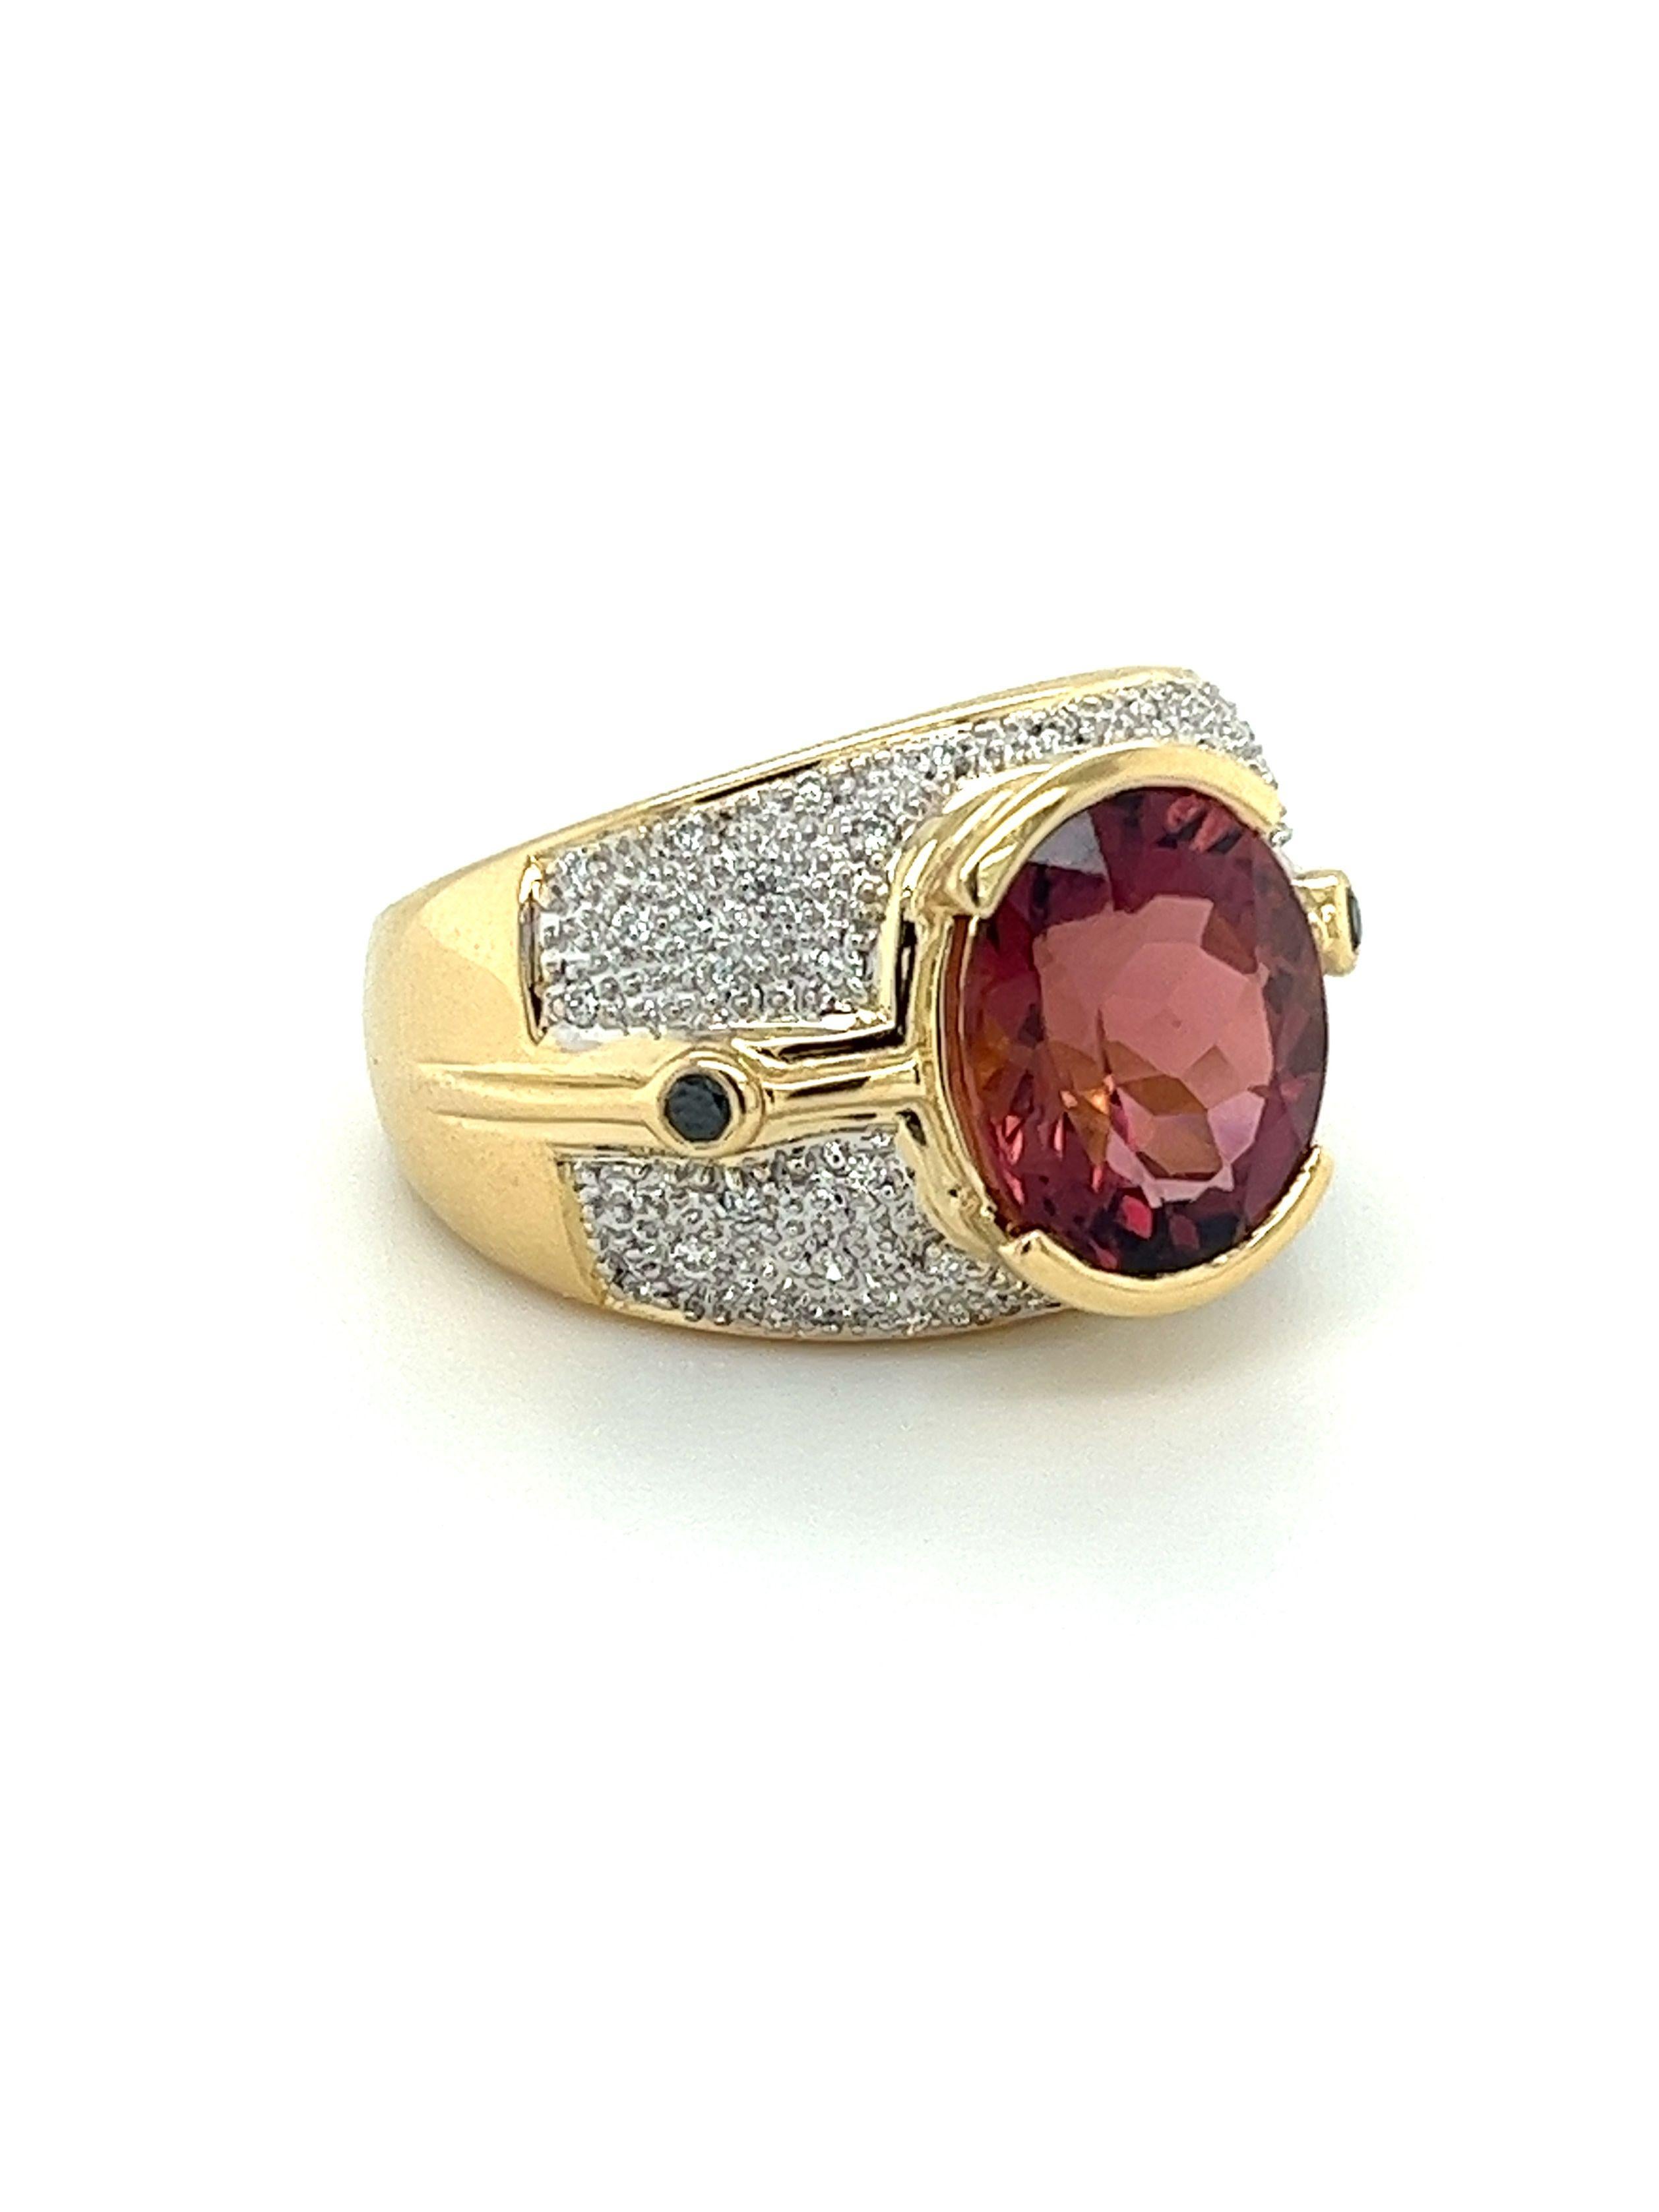 6 Carat Pinkish Red Oval Tourmaline with Black & White Diamond in 18K Gold For Sale 1